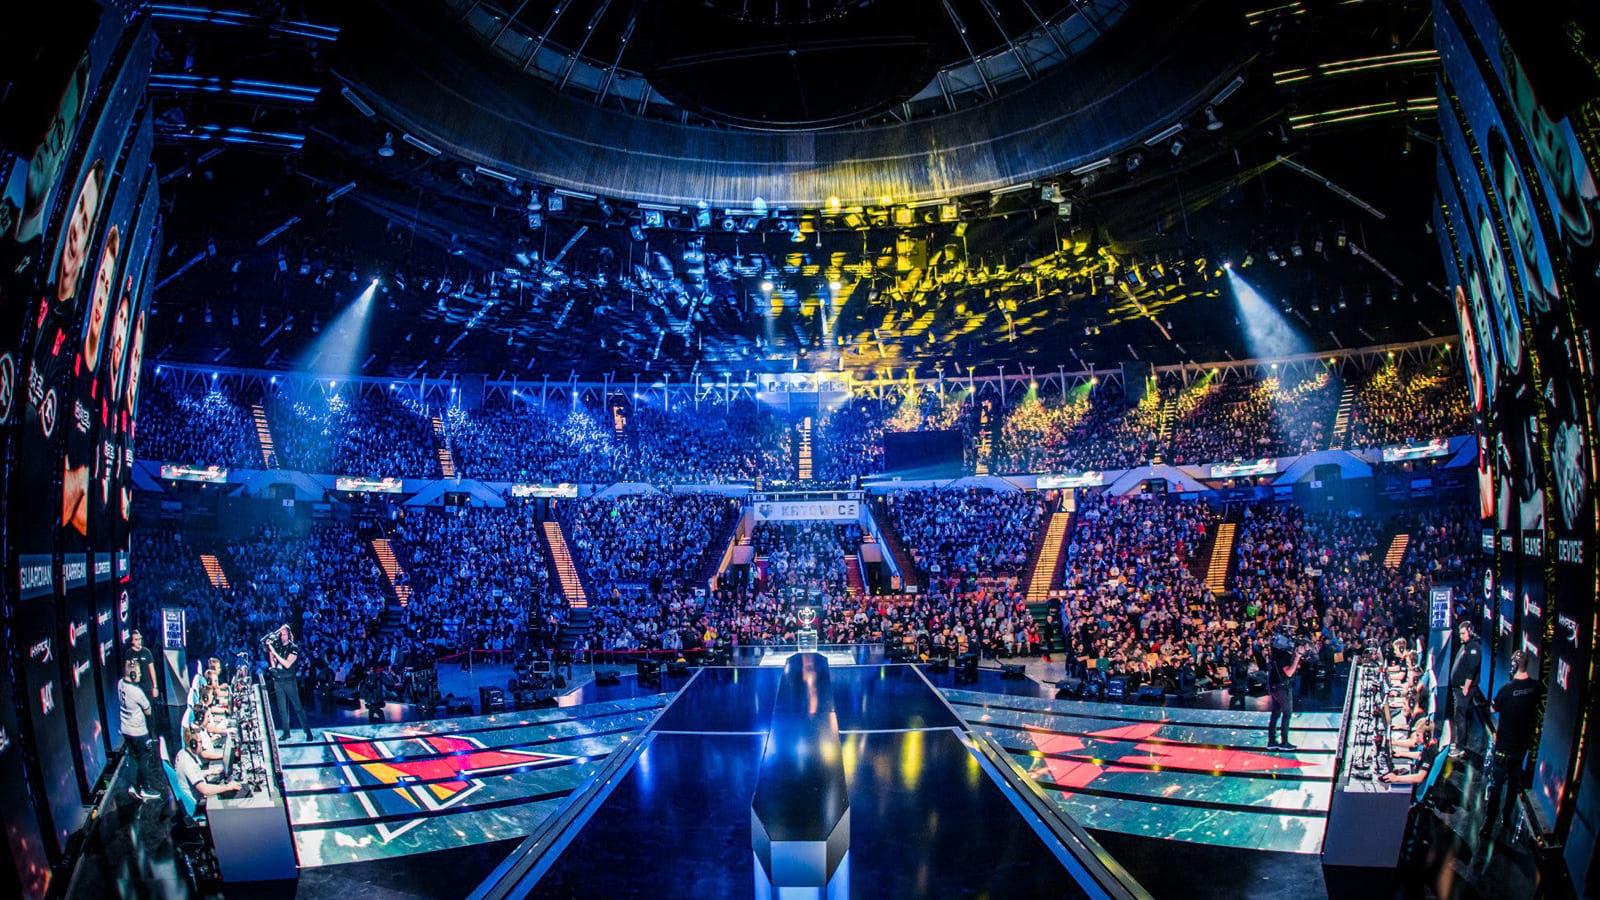 IEM Katowice crowd viewed from stage